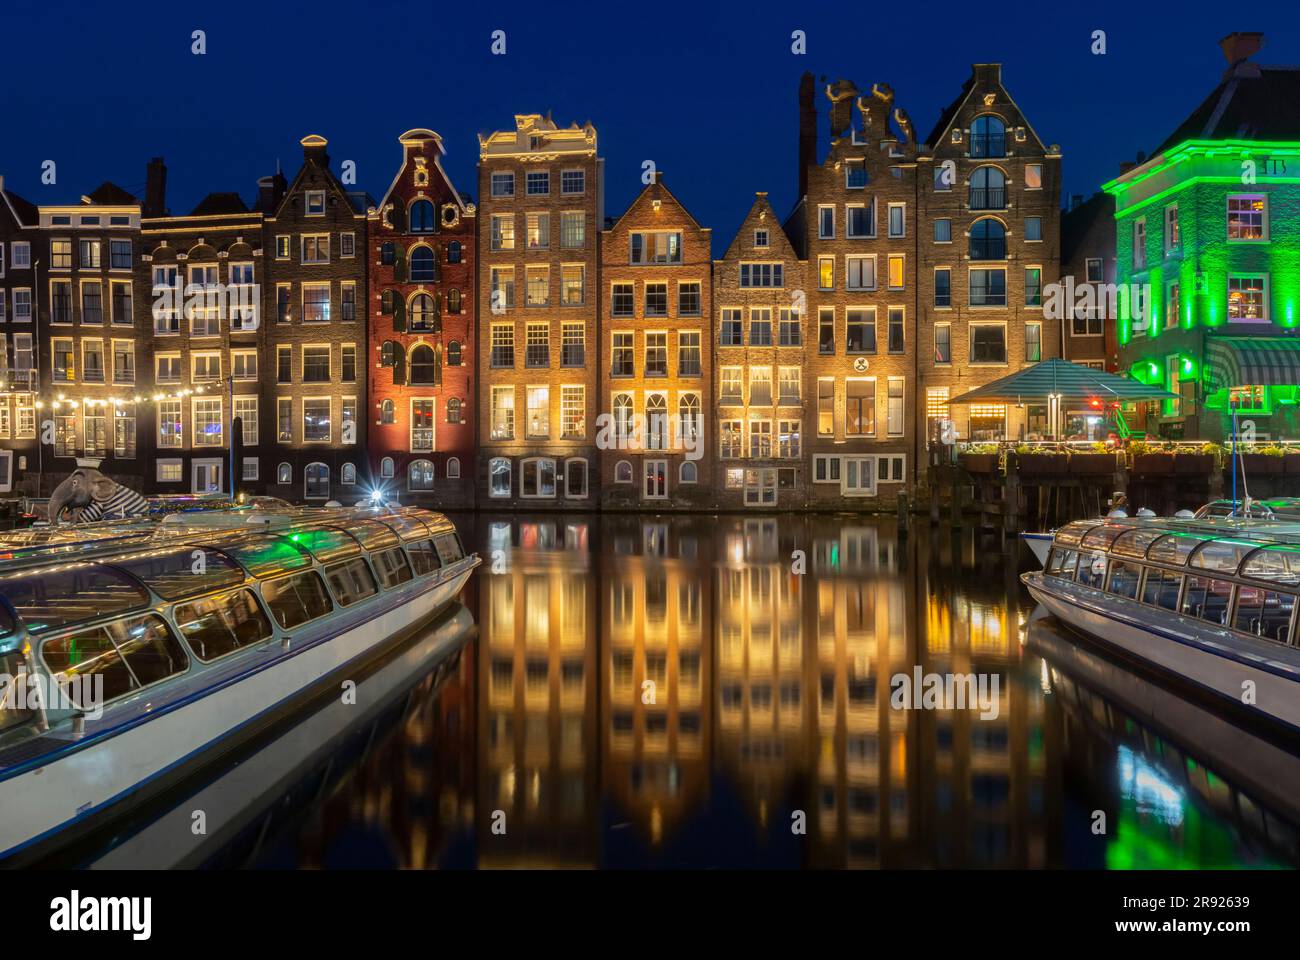 Netherlands, North Holland, Amsterdam, Row of townhouses along canal at night Stock Photo